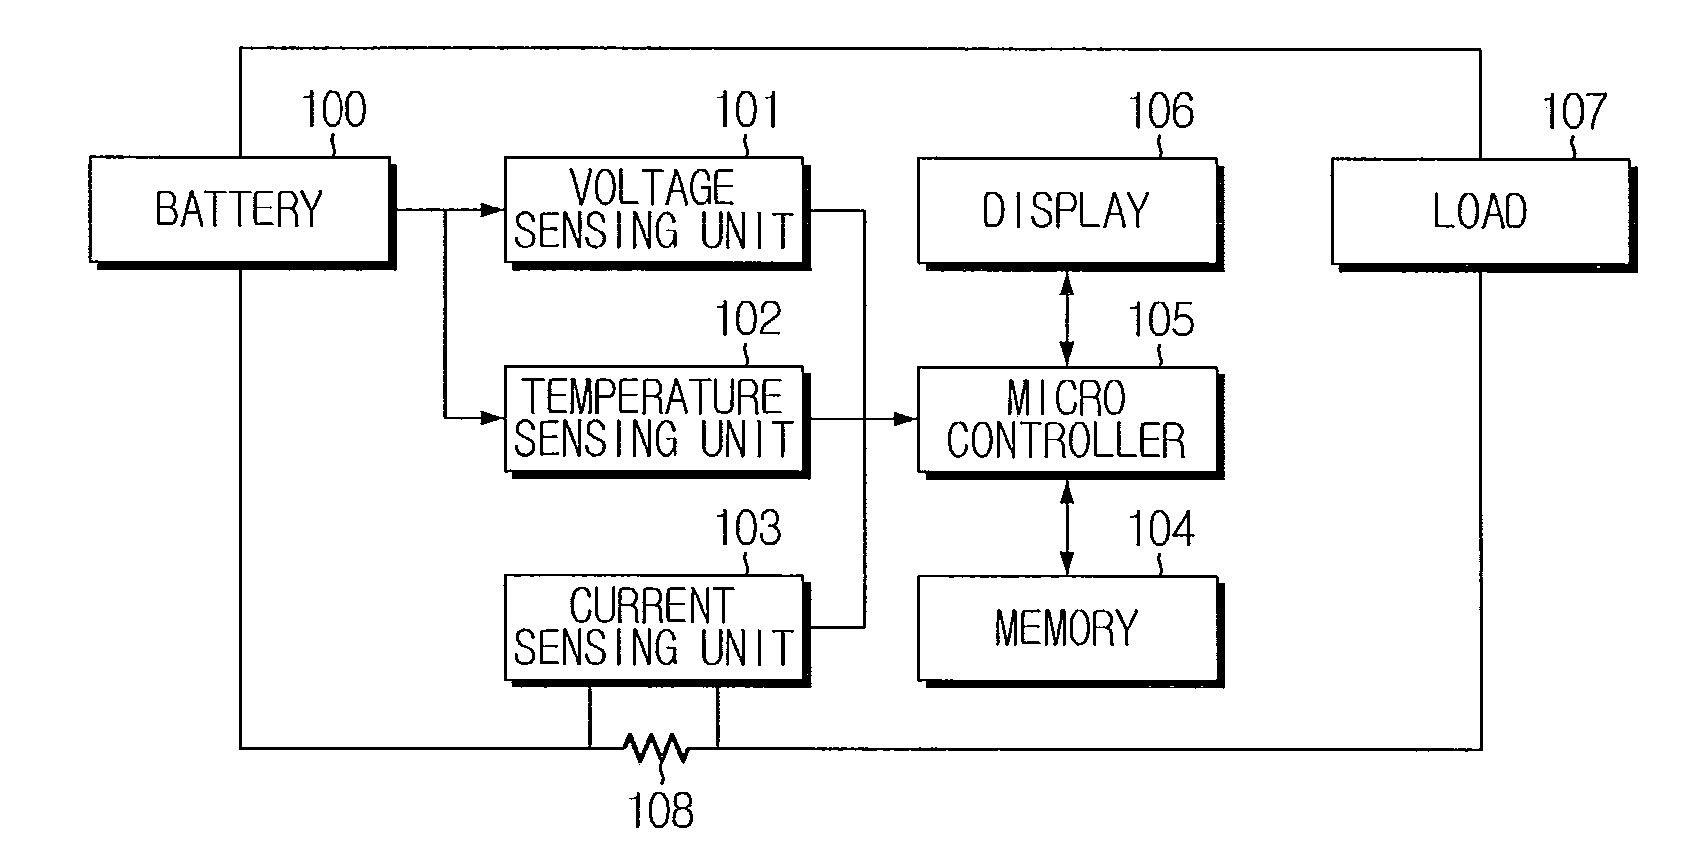 Apparatus and method for estimating state of health of battery based on battery voltage variation pattern